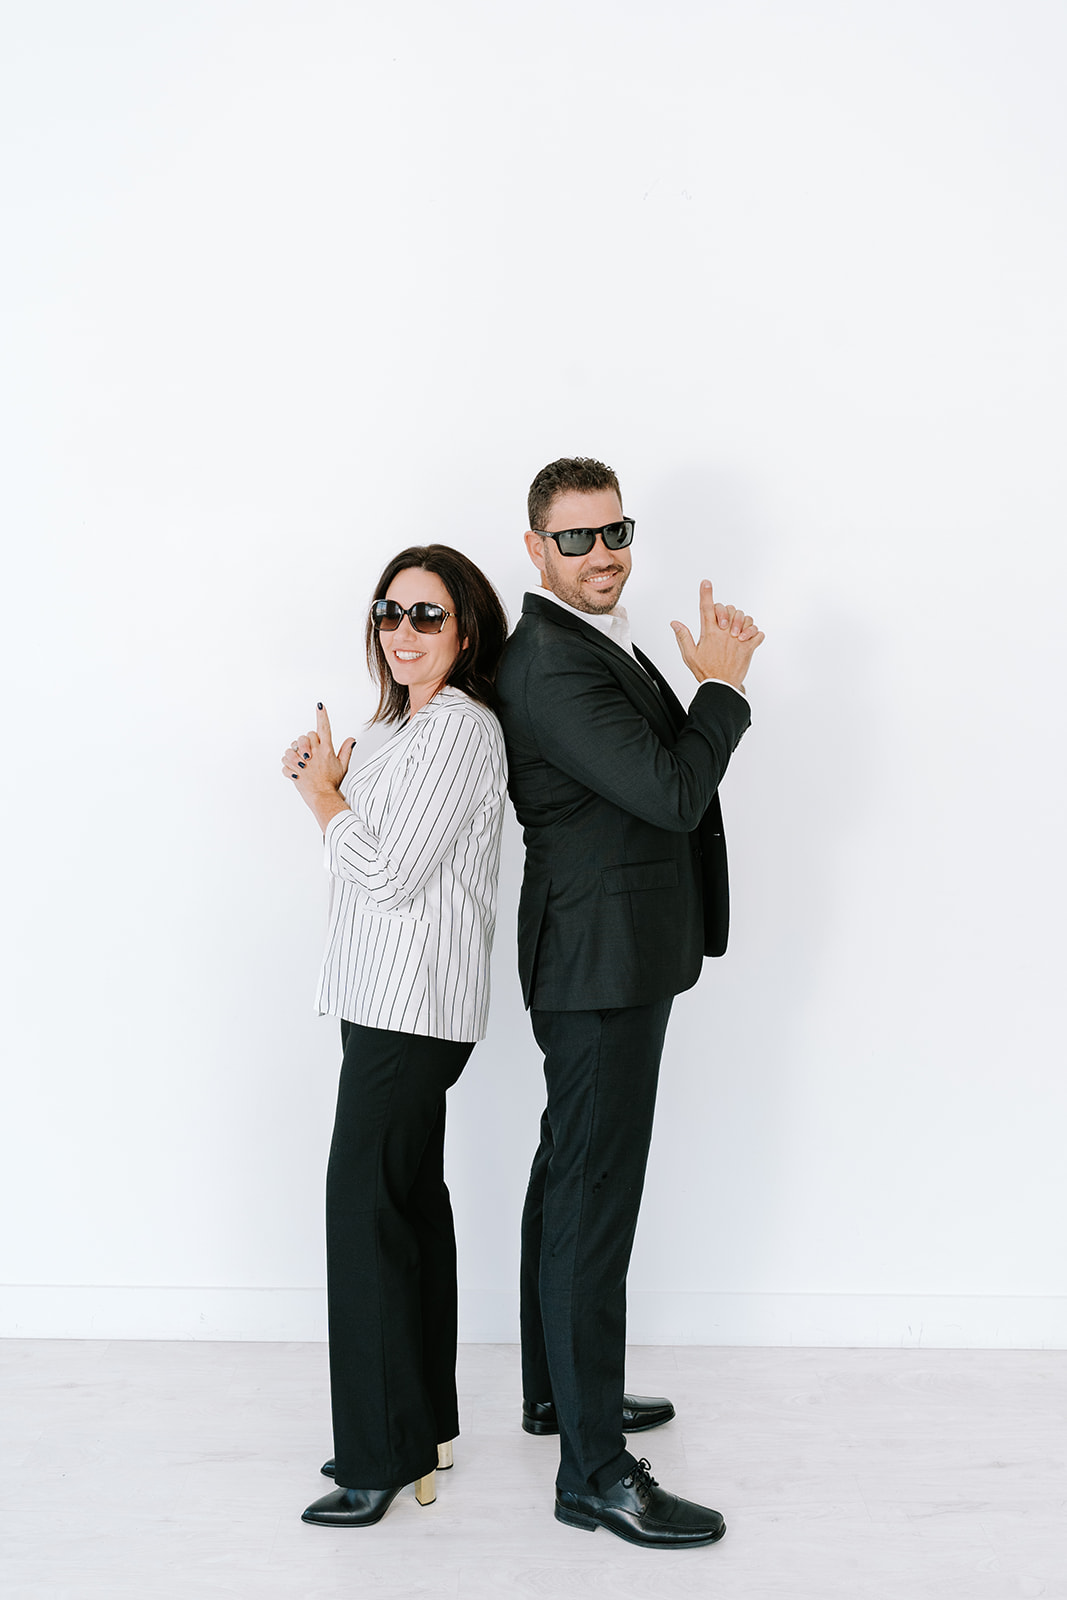 two realtors posing like Charlie's Angels with sunglasses on